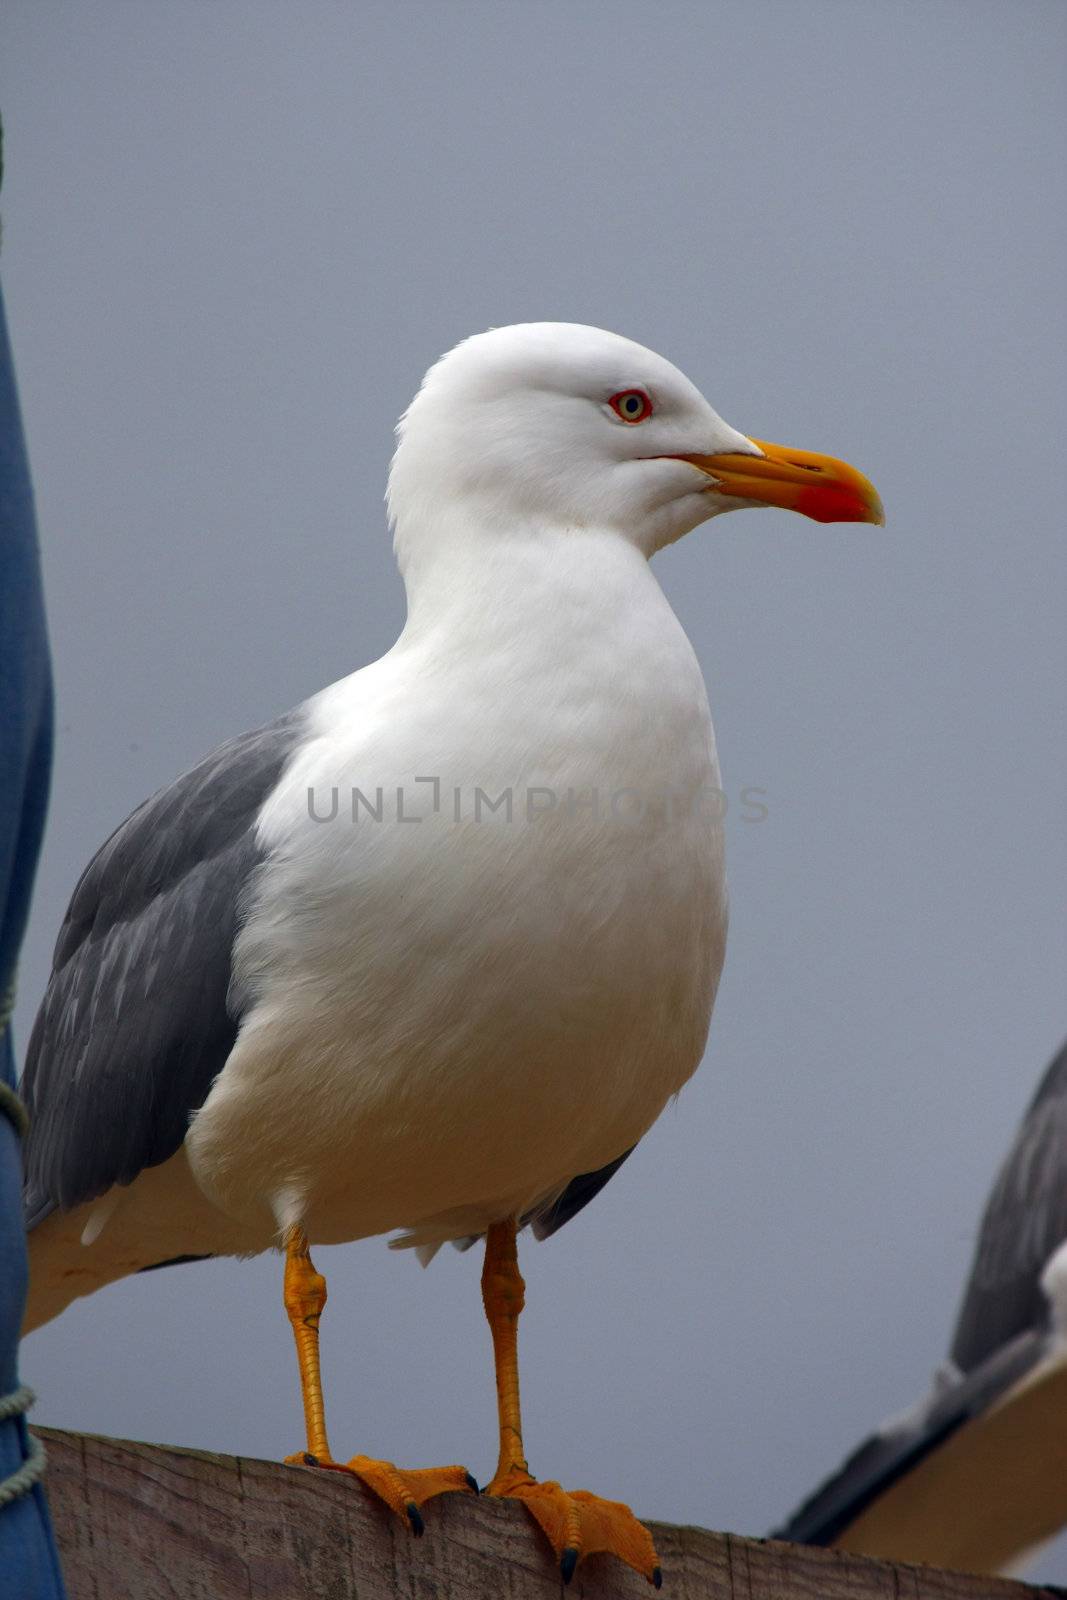 Close detail of an adult yellow-legged gull on top of a wooden box.